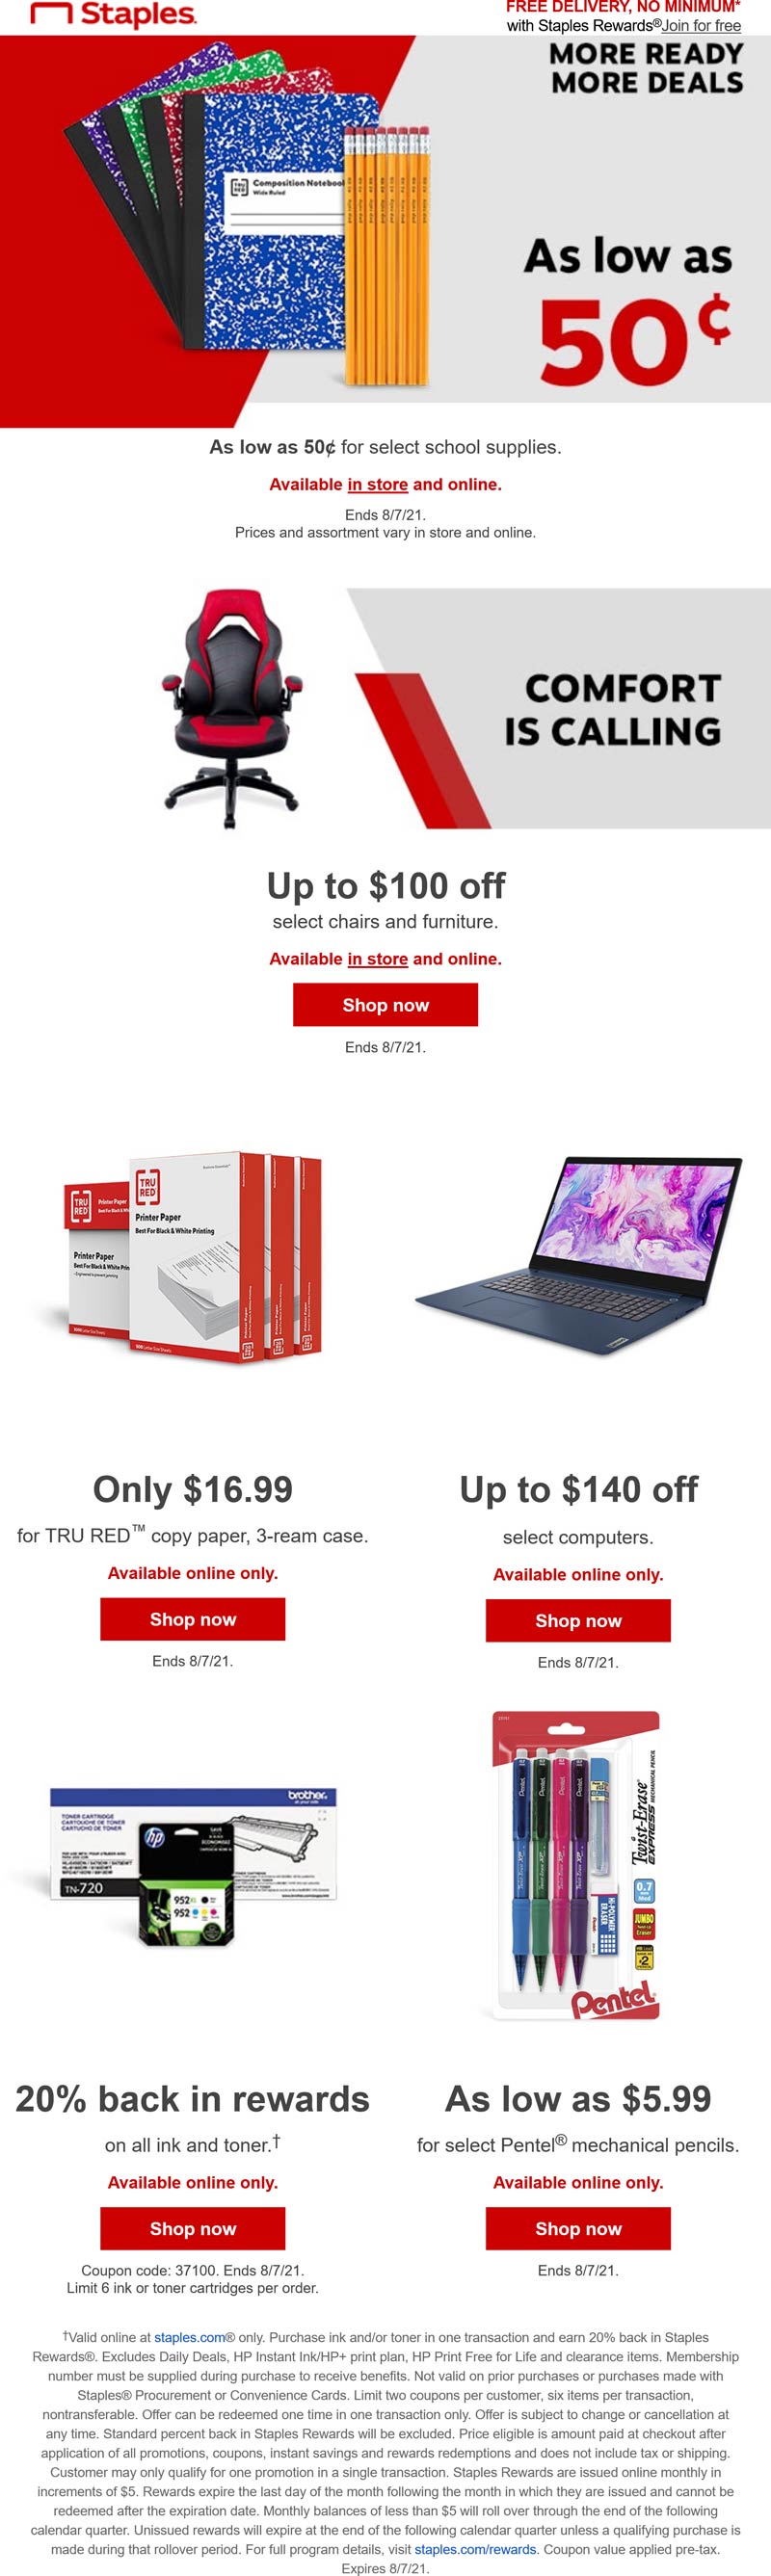 Staples stores Coupon  .50 cent school supplies & more today at Staples, ditto online #staples 